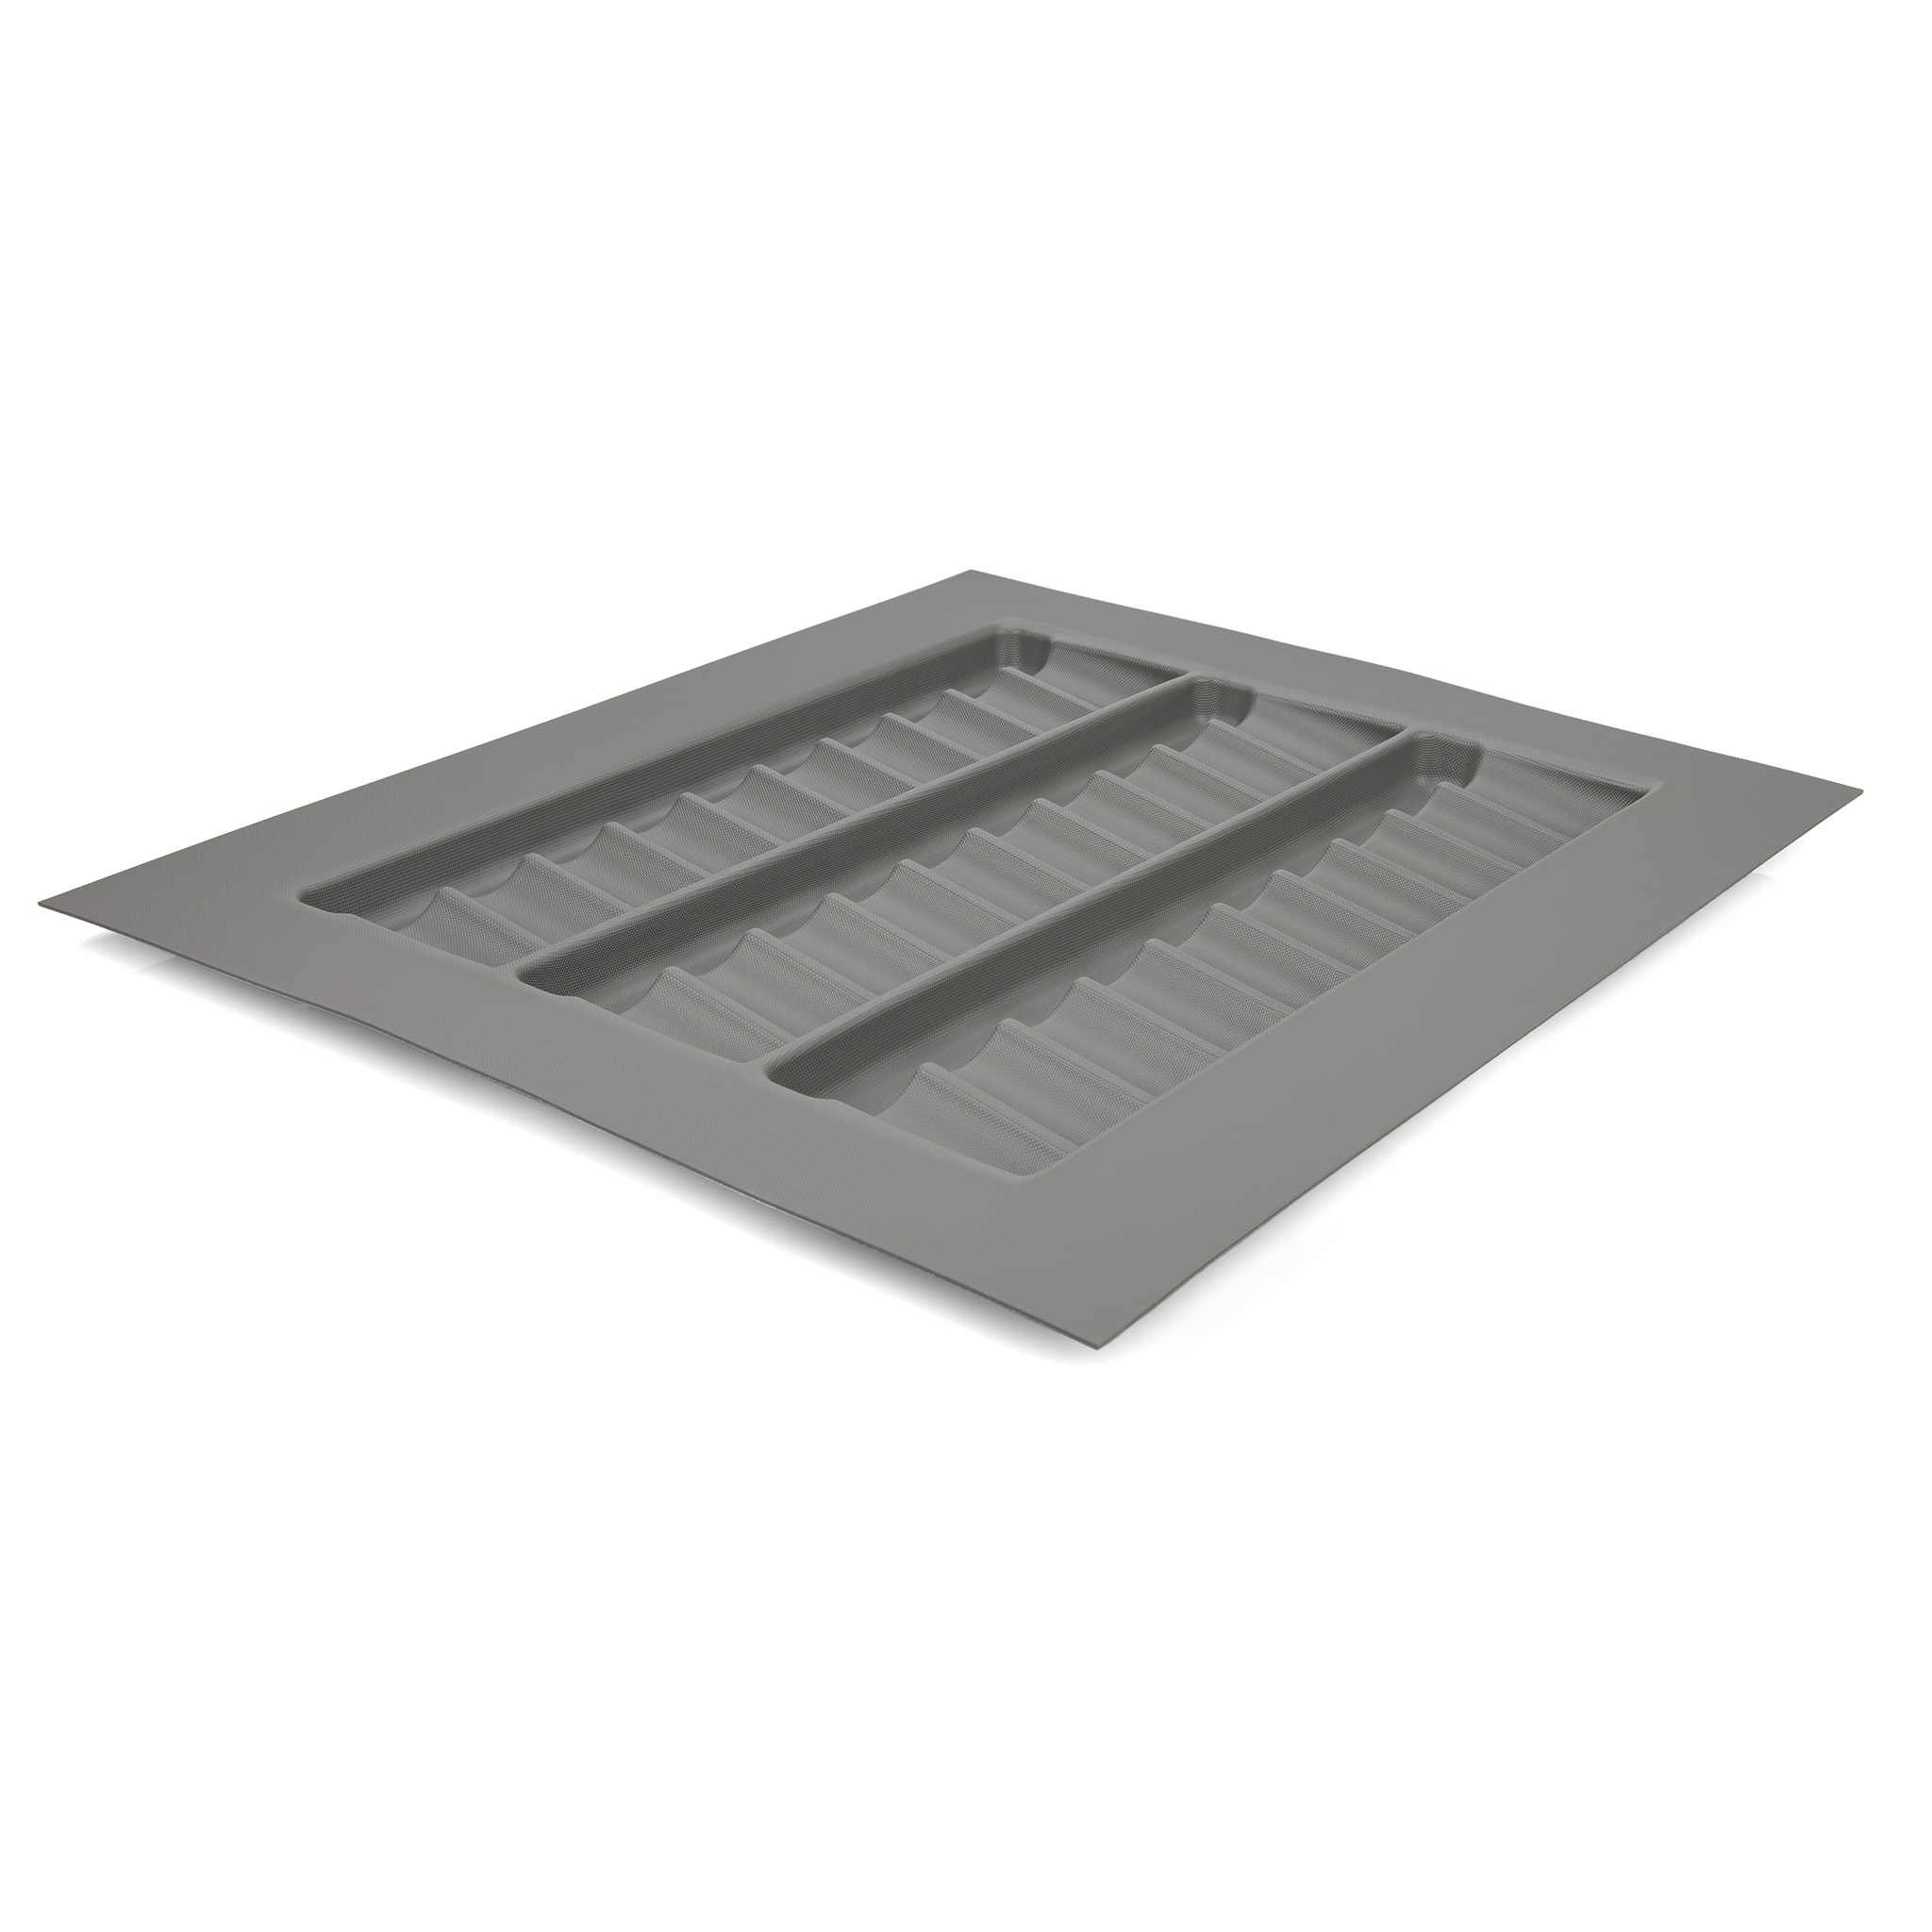 Area Spice Tray Organizers, 480mm - 600mm, Grey Matte Textured